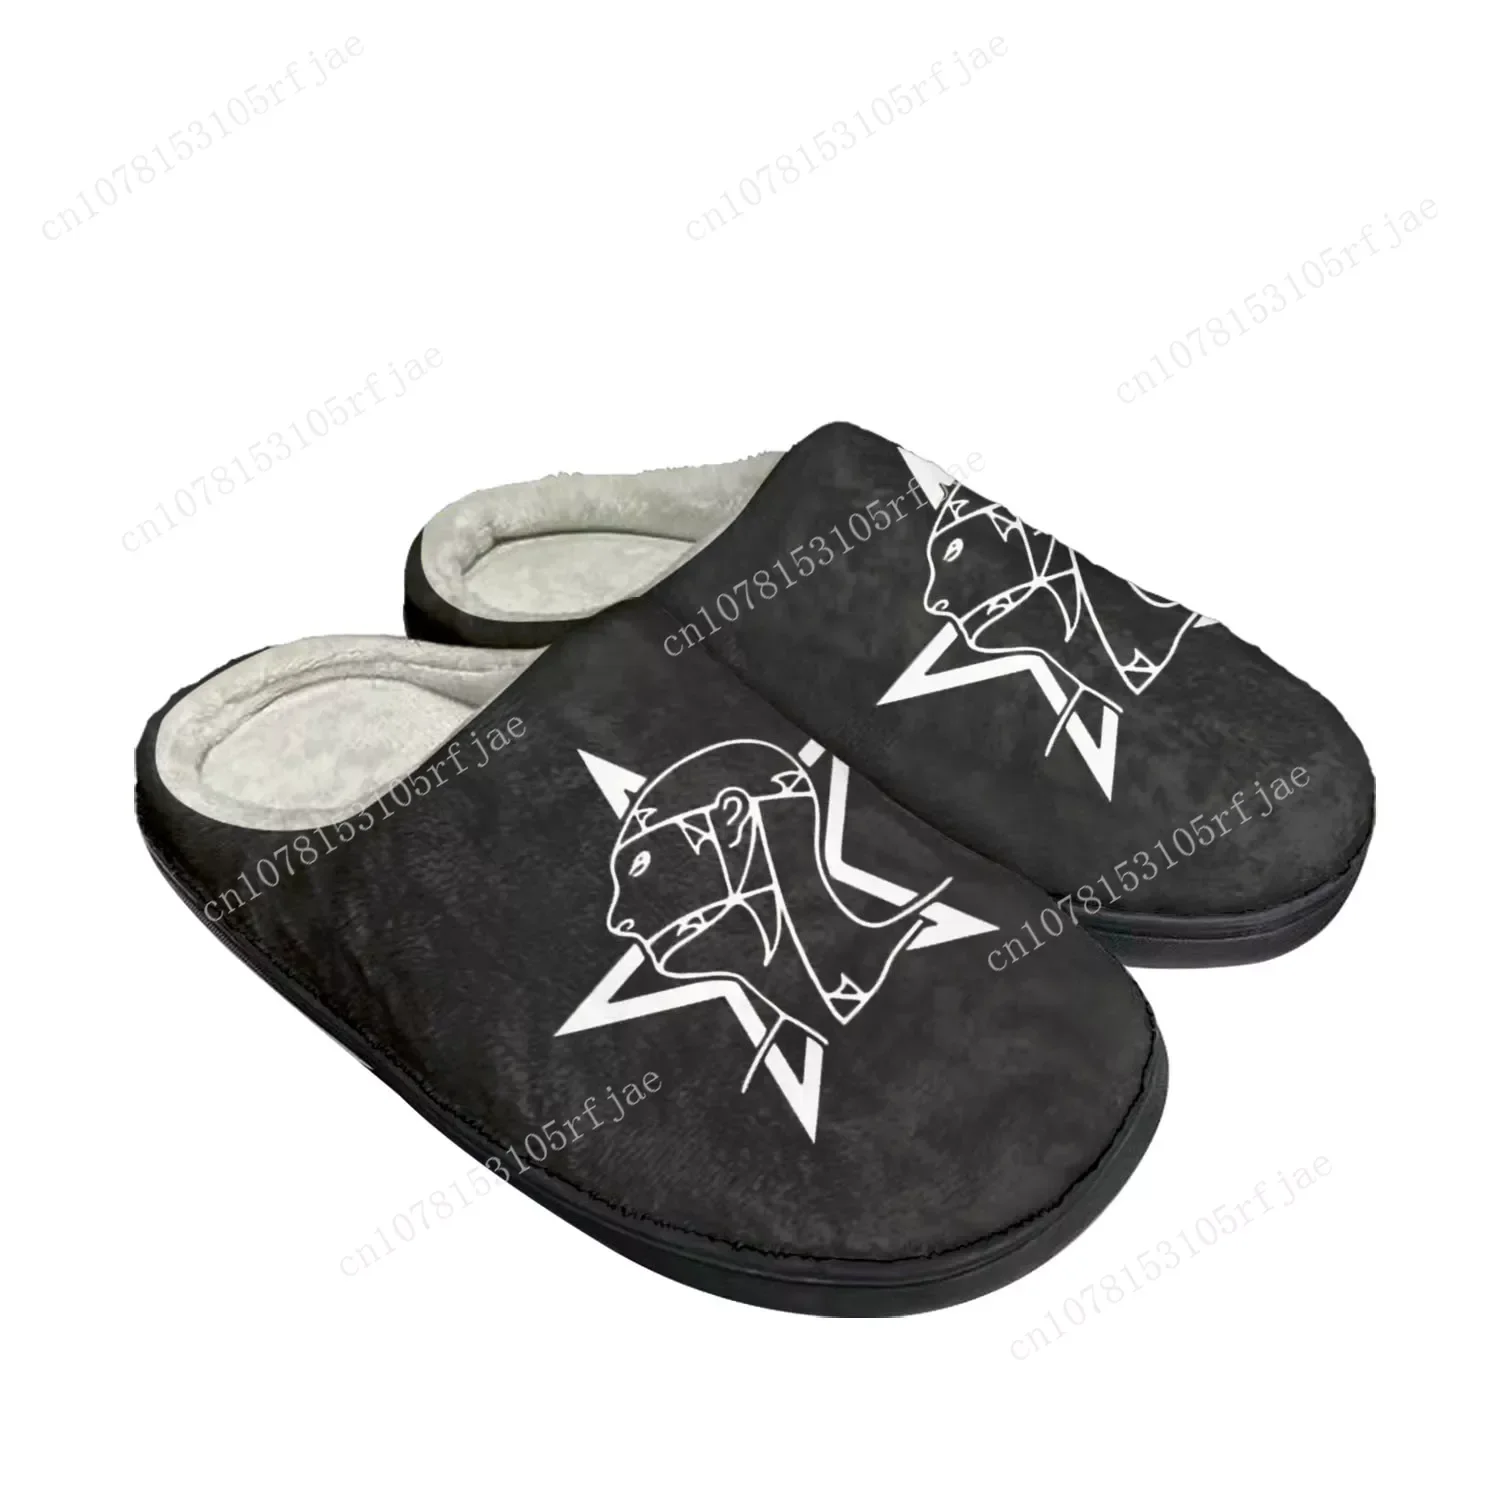 

Mercy Rock Band Andrew Eldritch Home Cotton Custom Slippers Mens Womens Sandals Plush Bedroom Keep Warm Shoe Thermal Slipper